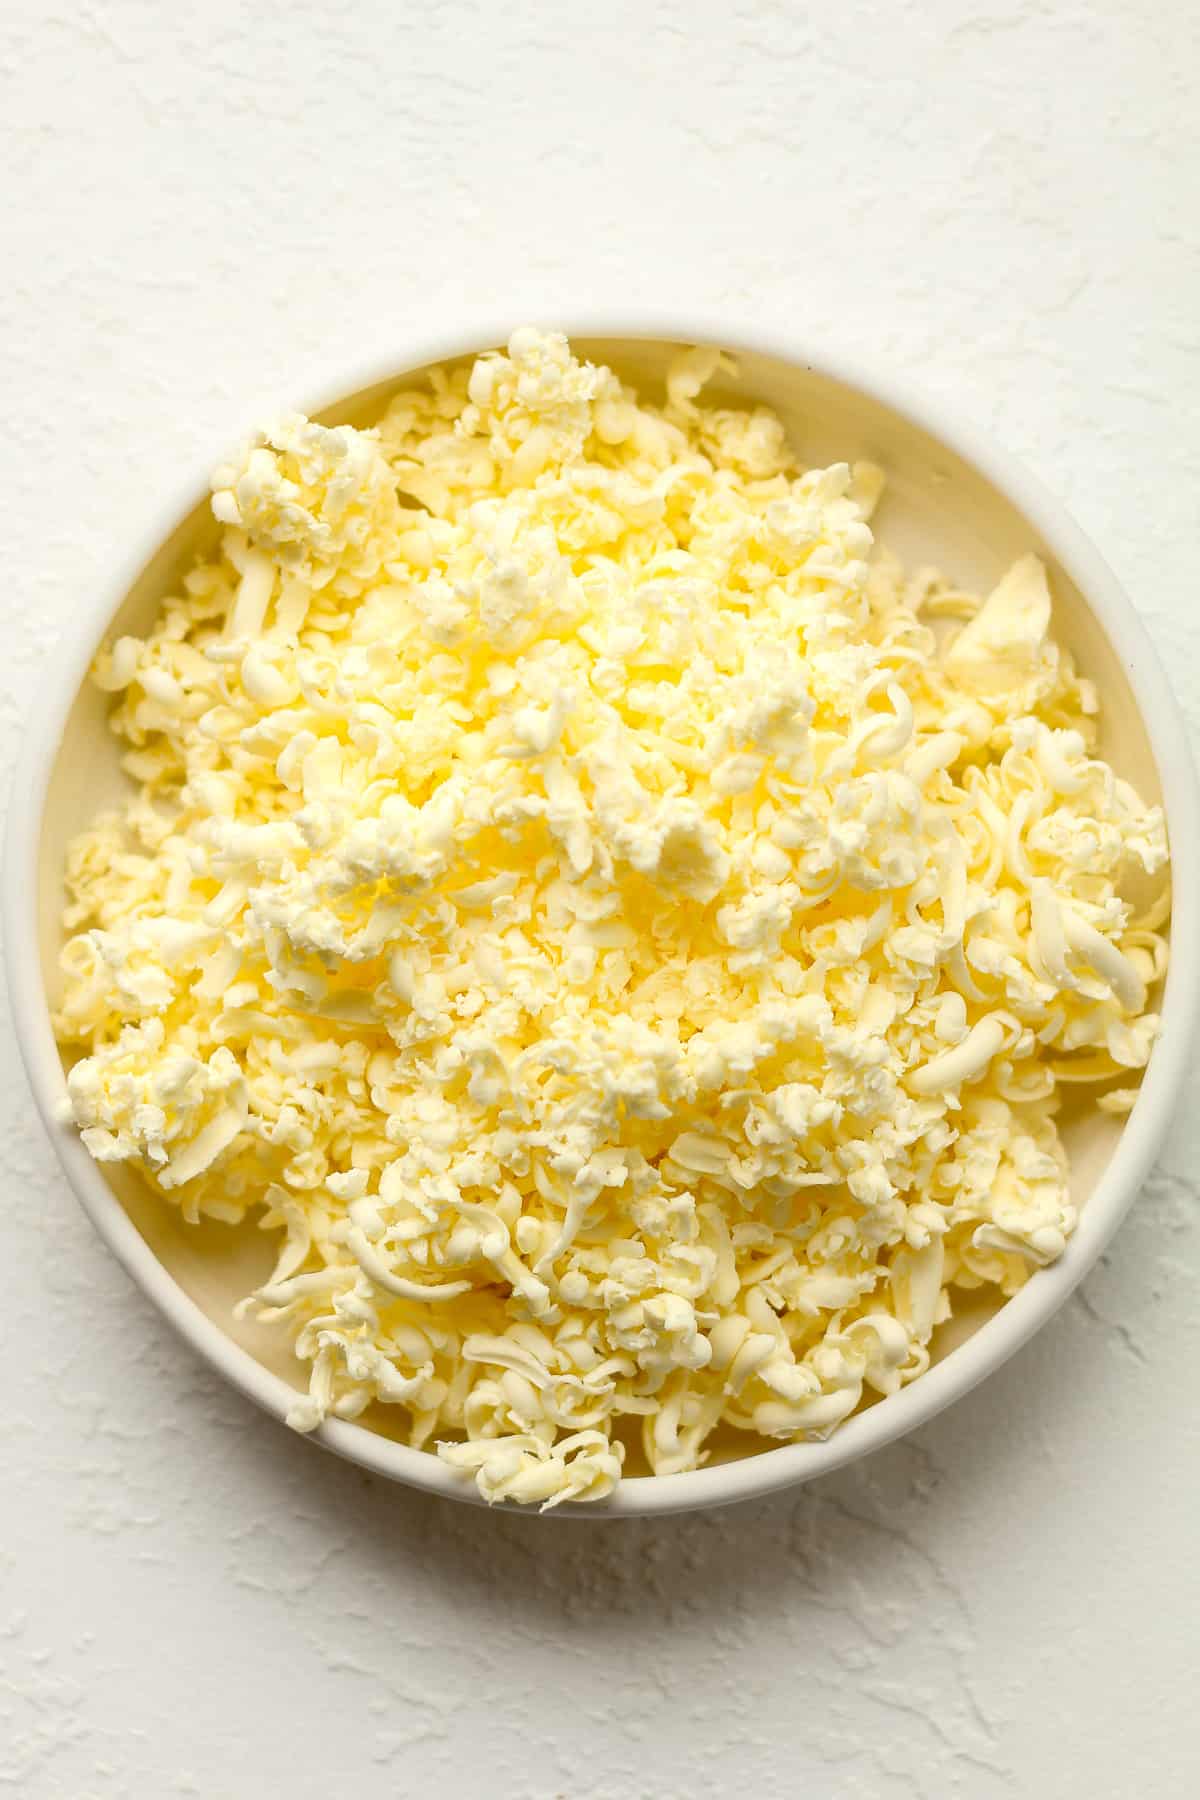 A bowl of the shredded cold butter.